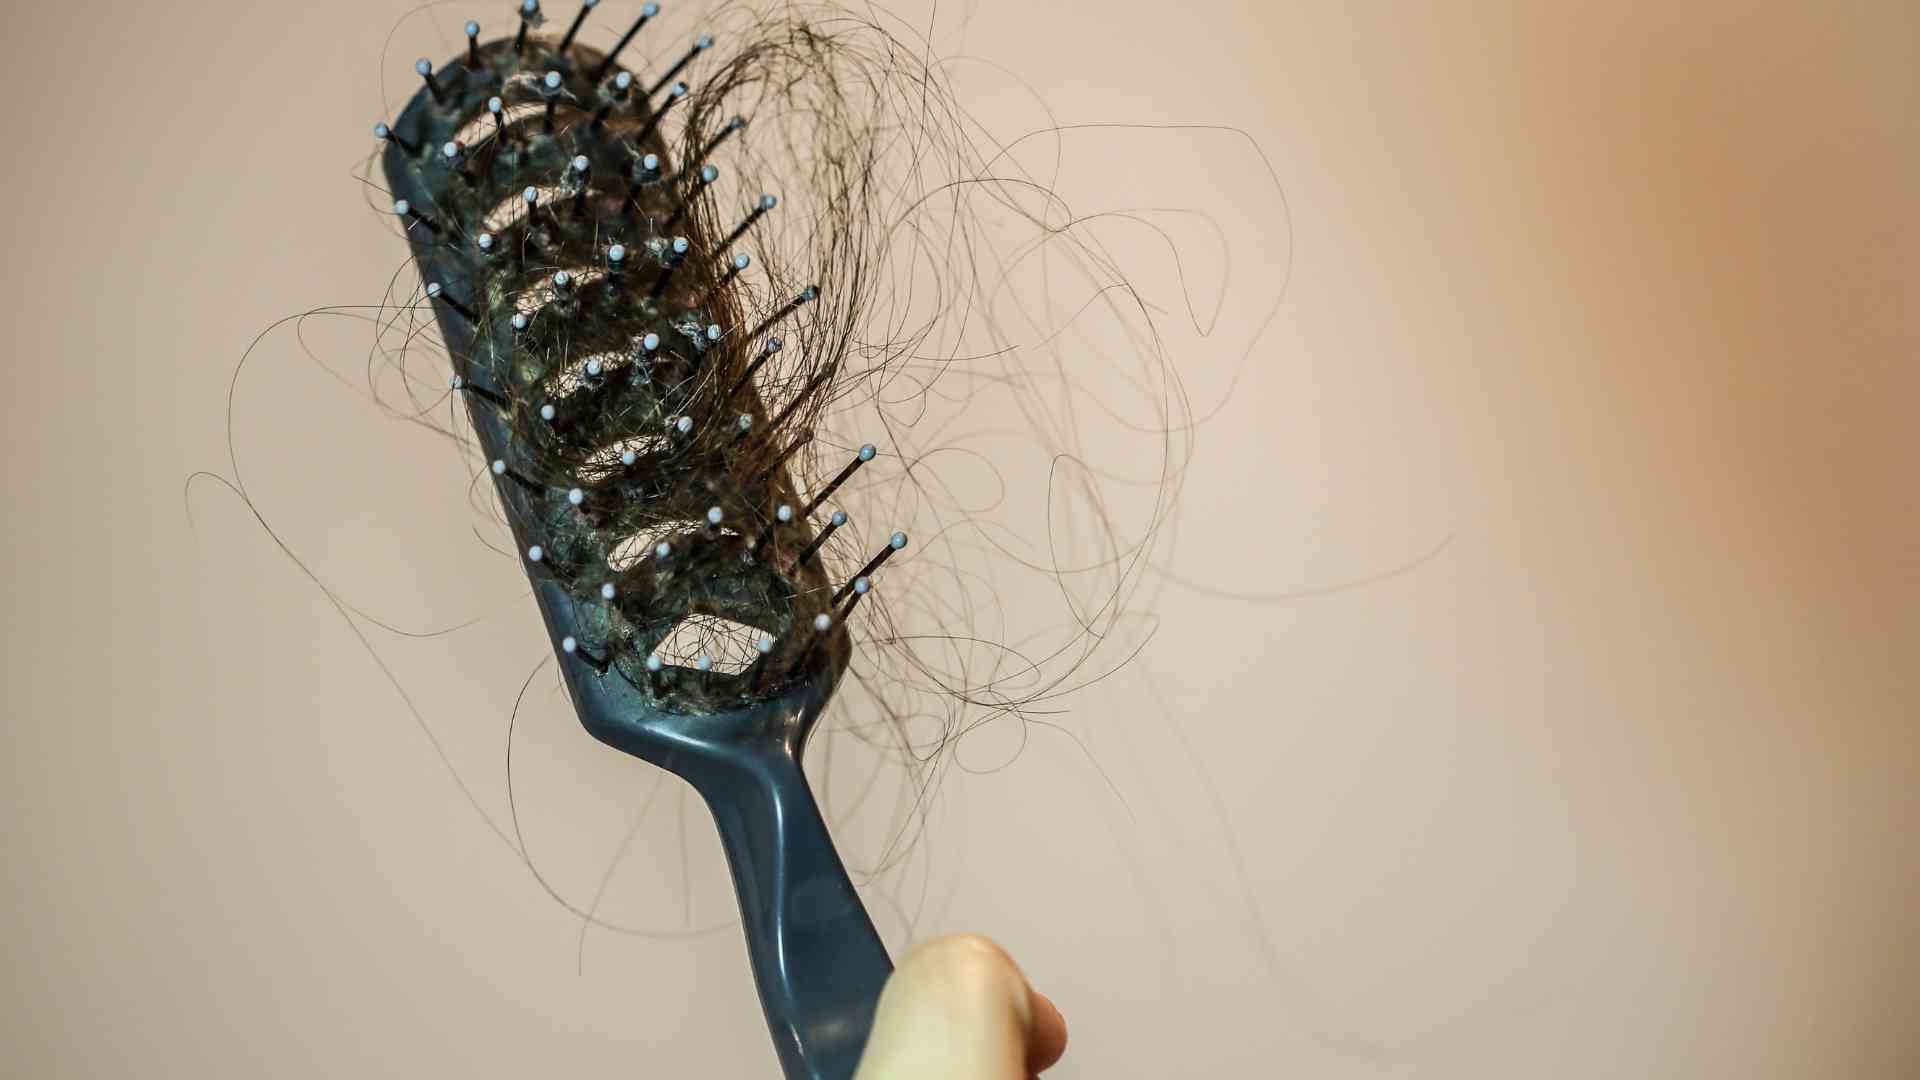 What are some common misconceptions about hair loss